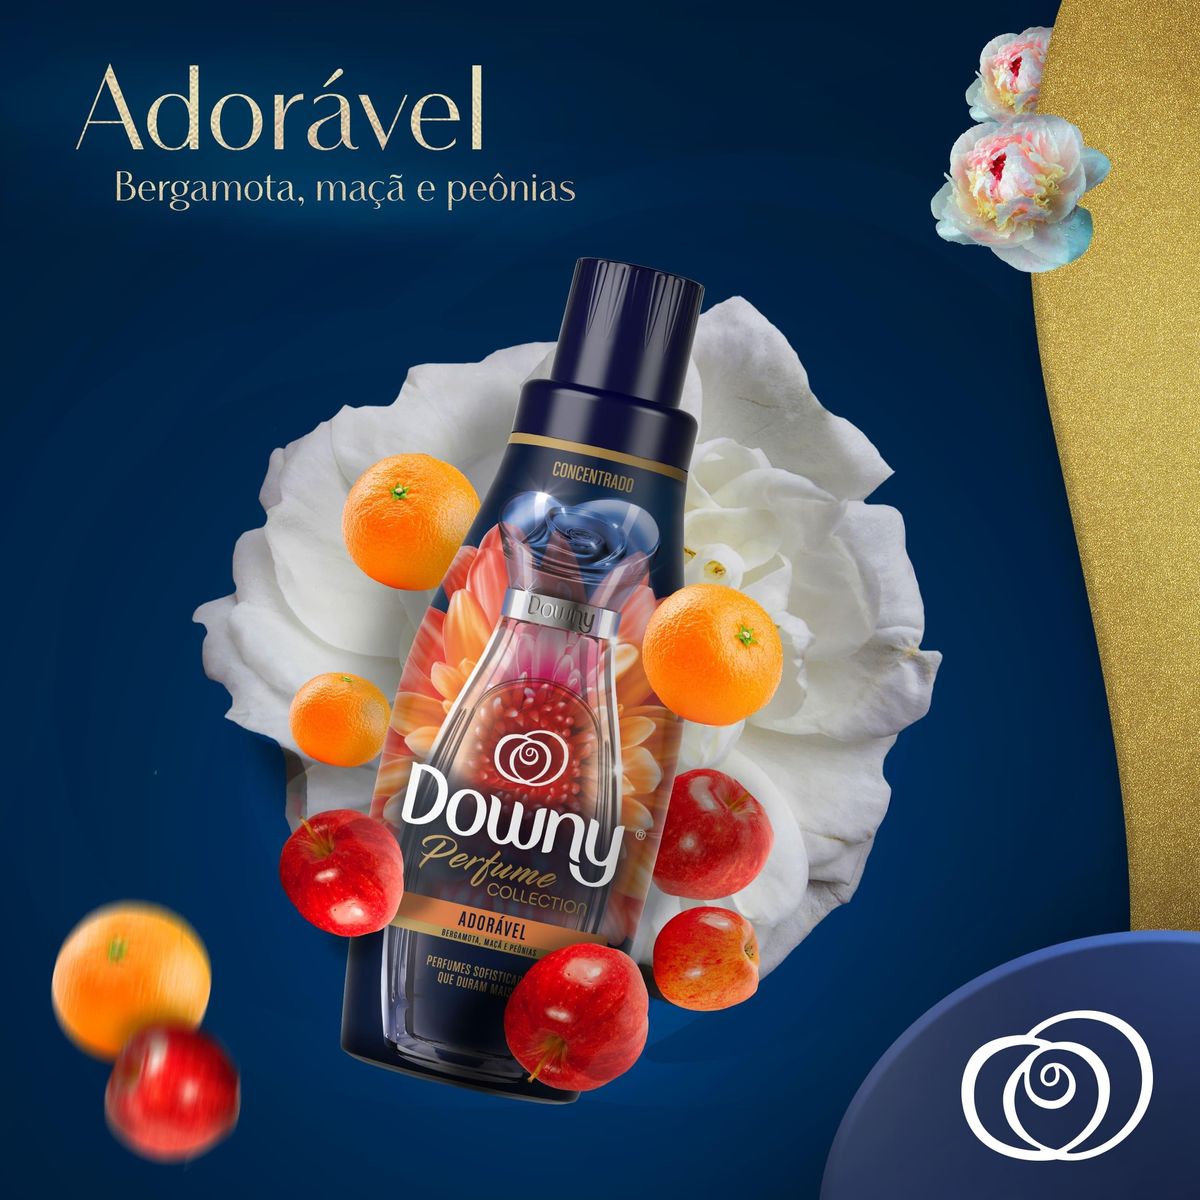 Amaciante Conc. Downy Perfume Collection Adorável 1,35L image number 6